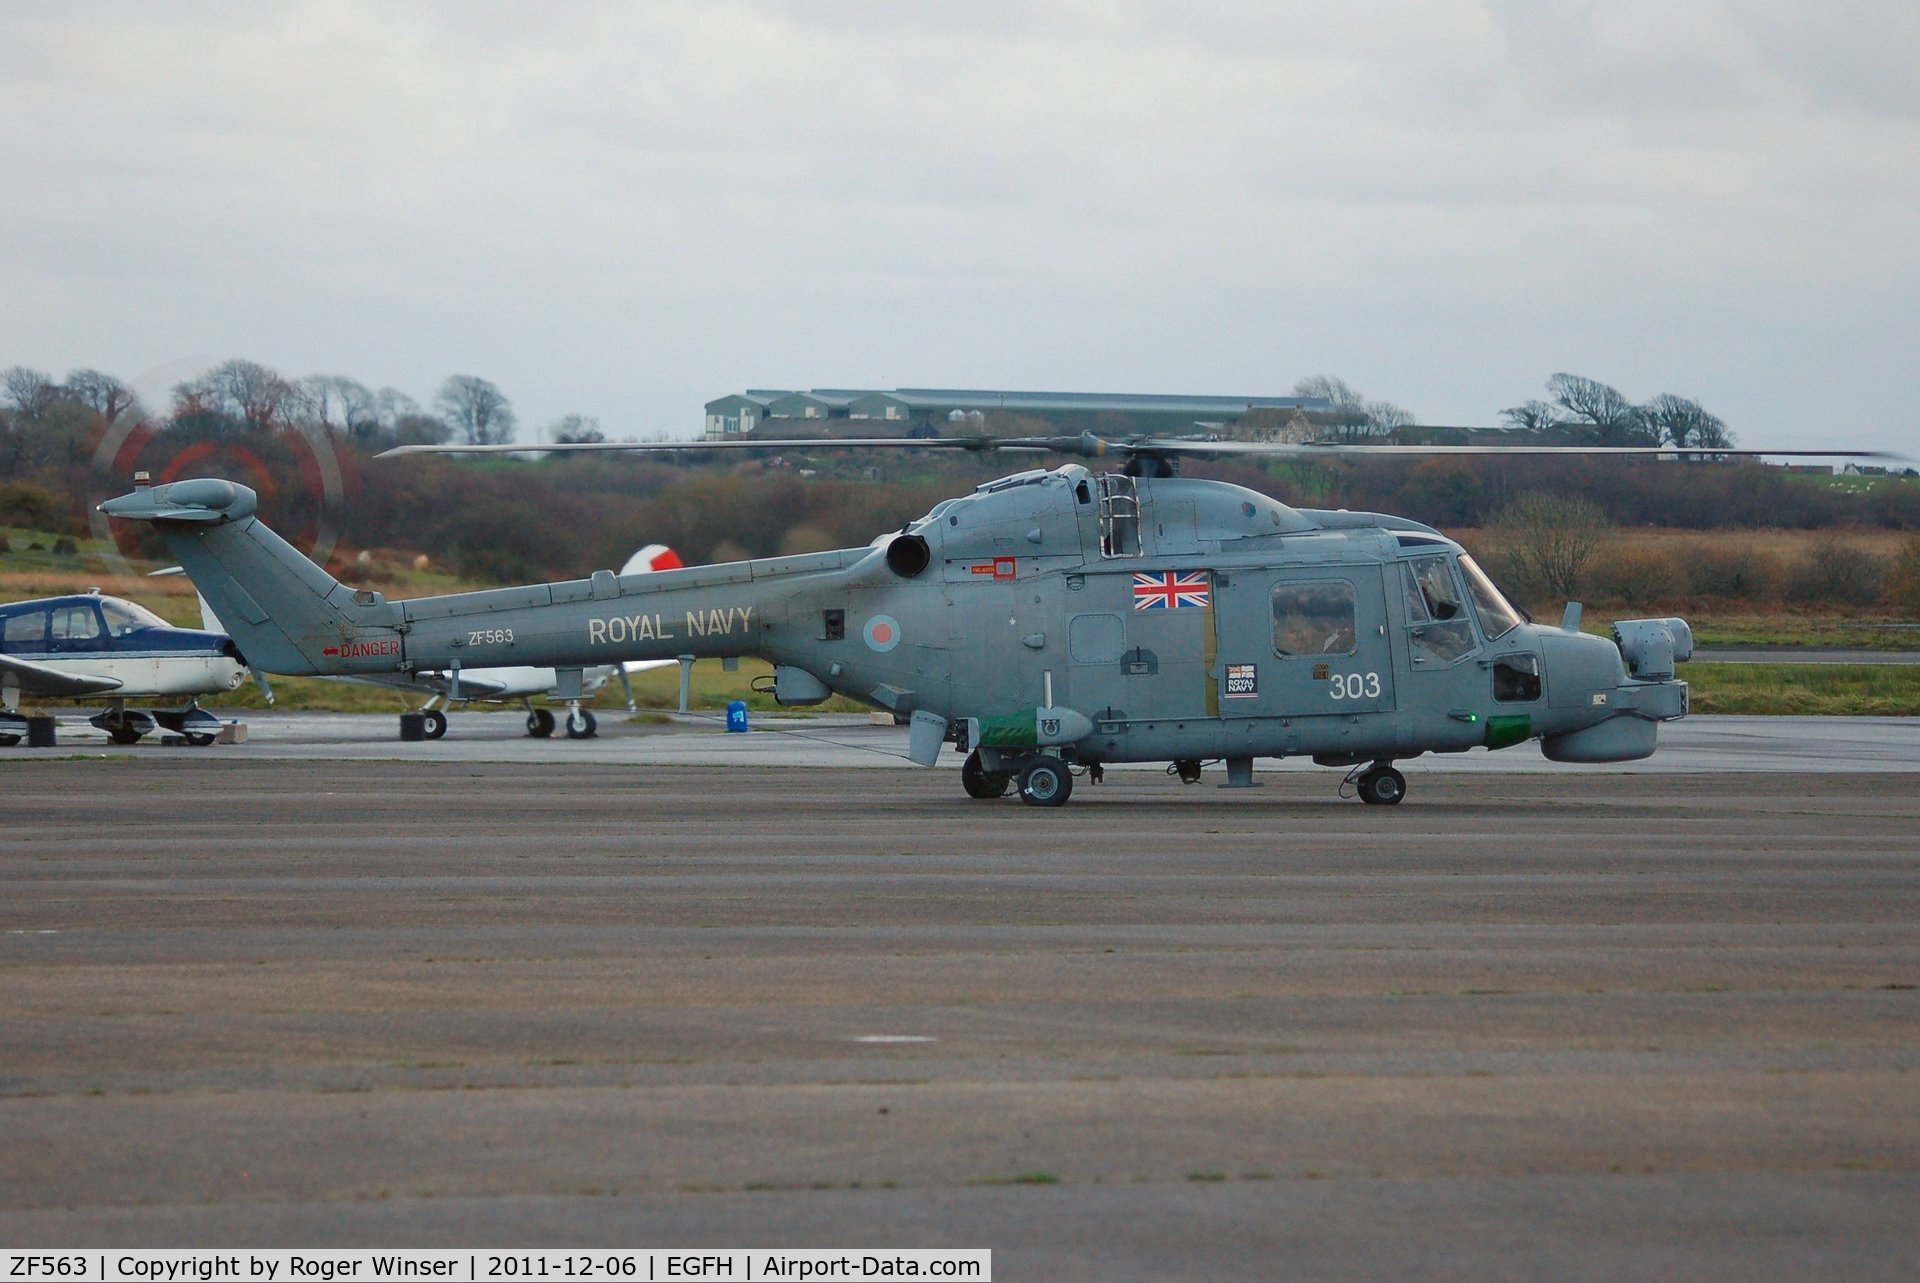 ZF563, 1988 Westland Lynx HMA.8SRU C/N 340, Coded 303 of 815 NAS. About to depart after taking on fuel.